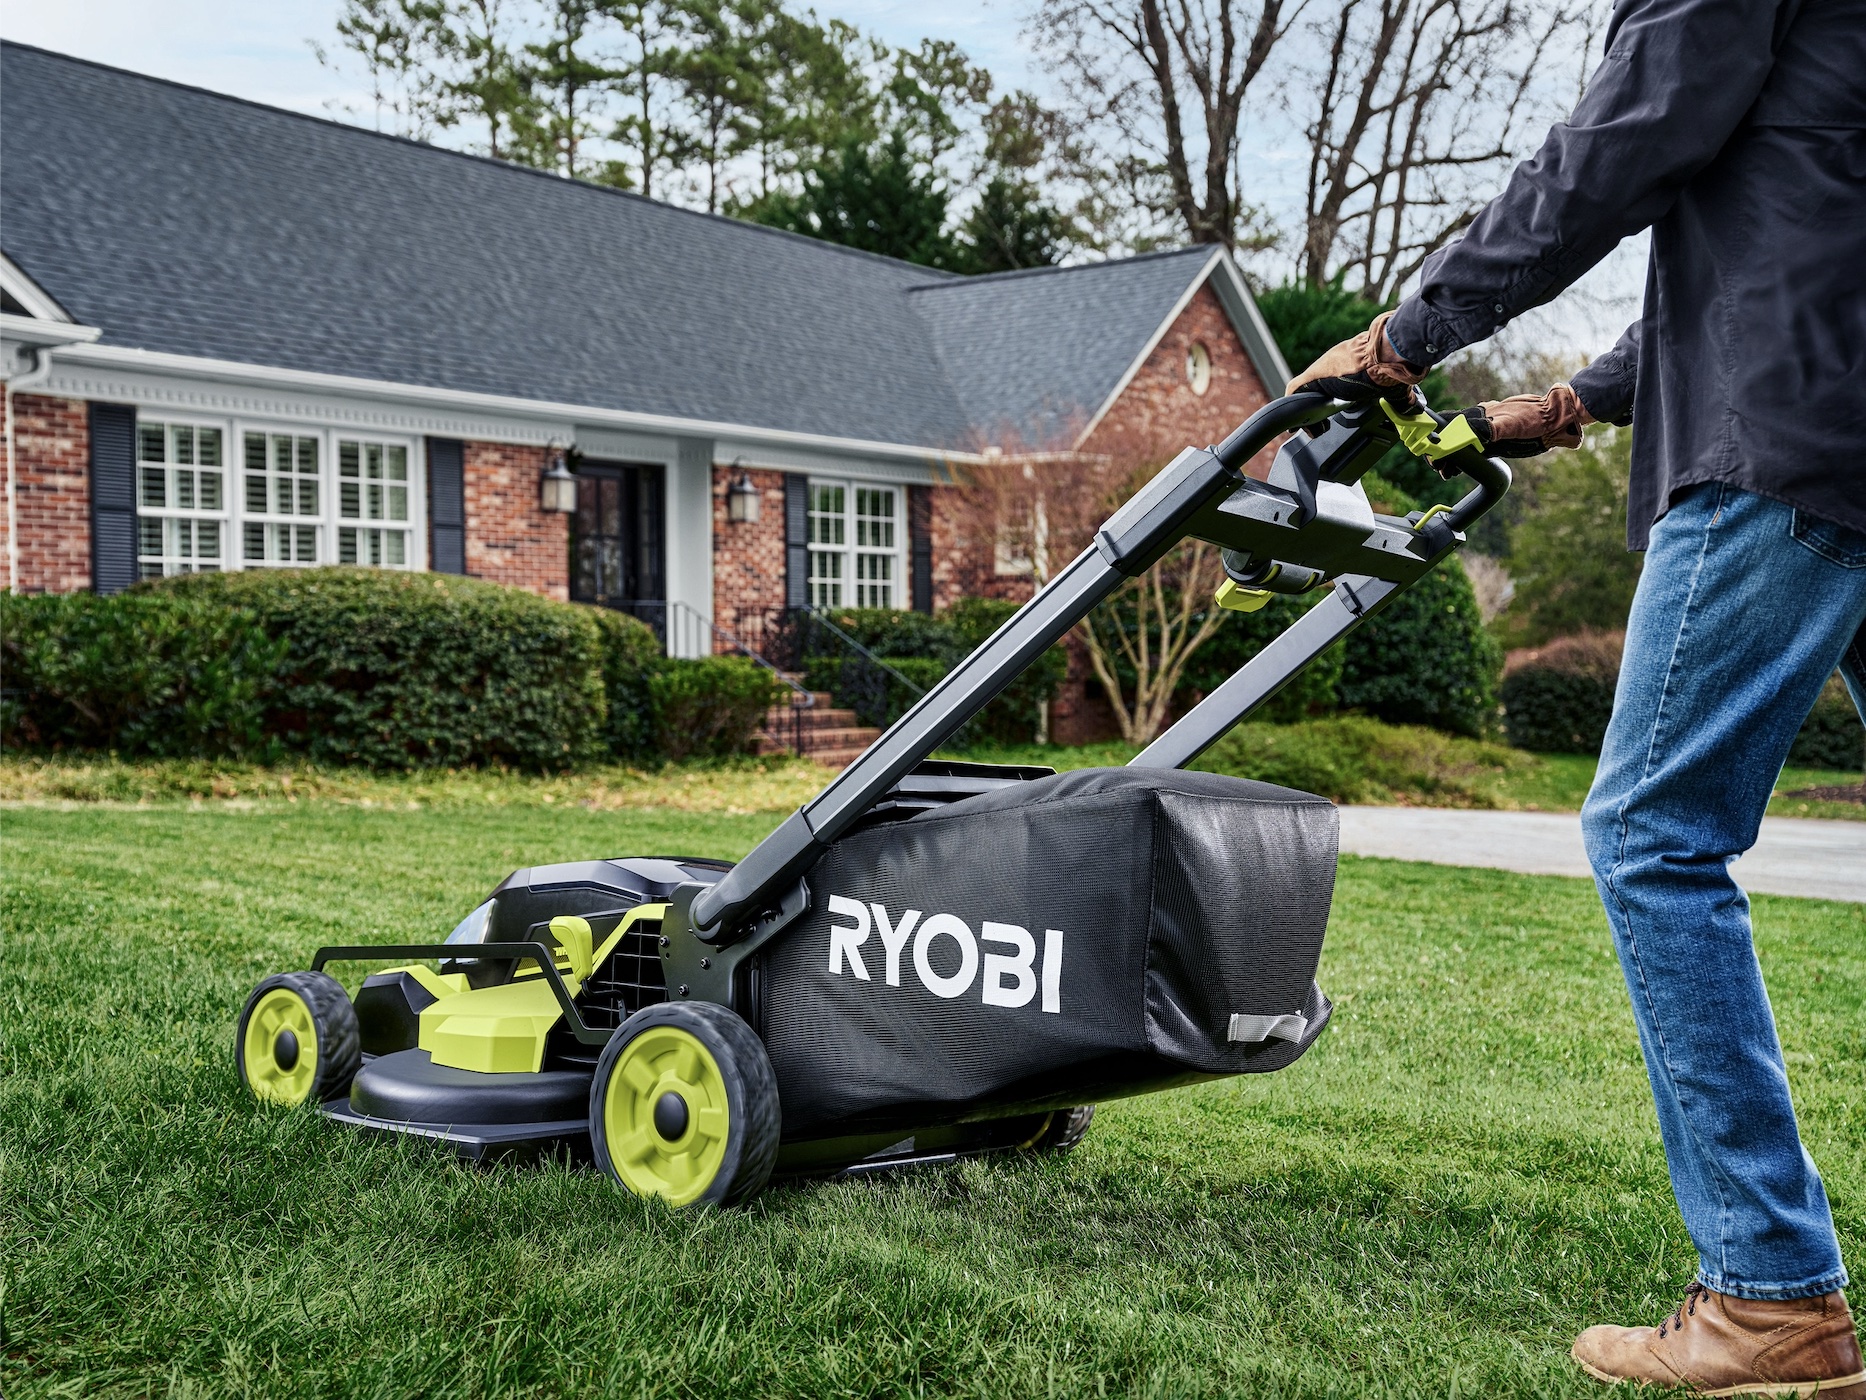 Used Ryobi Lawn Mower For Sale Discount